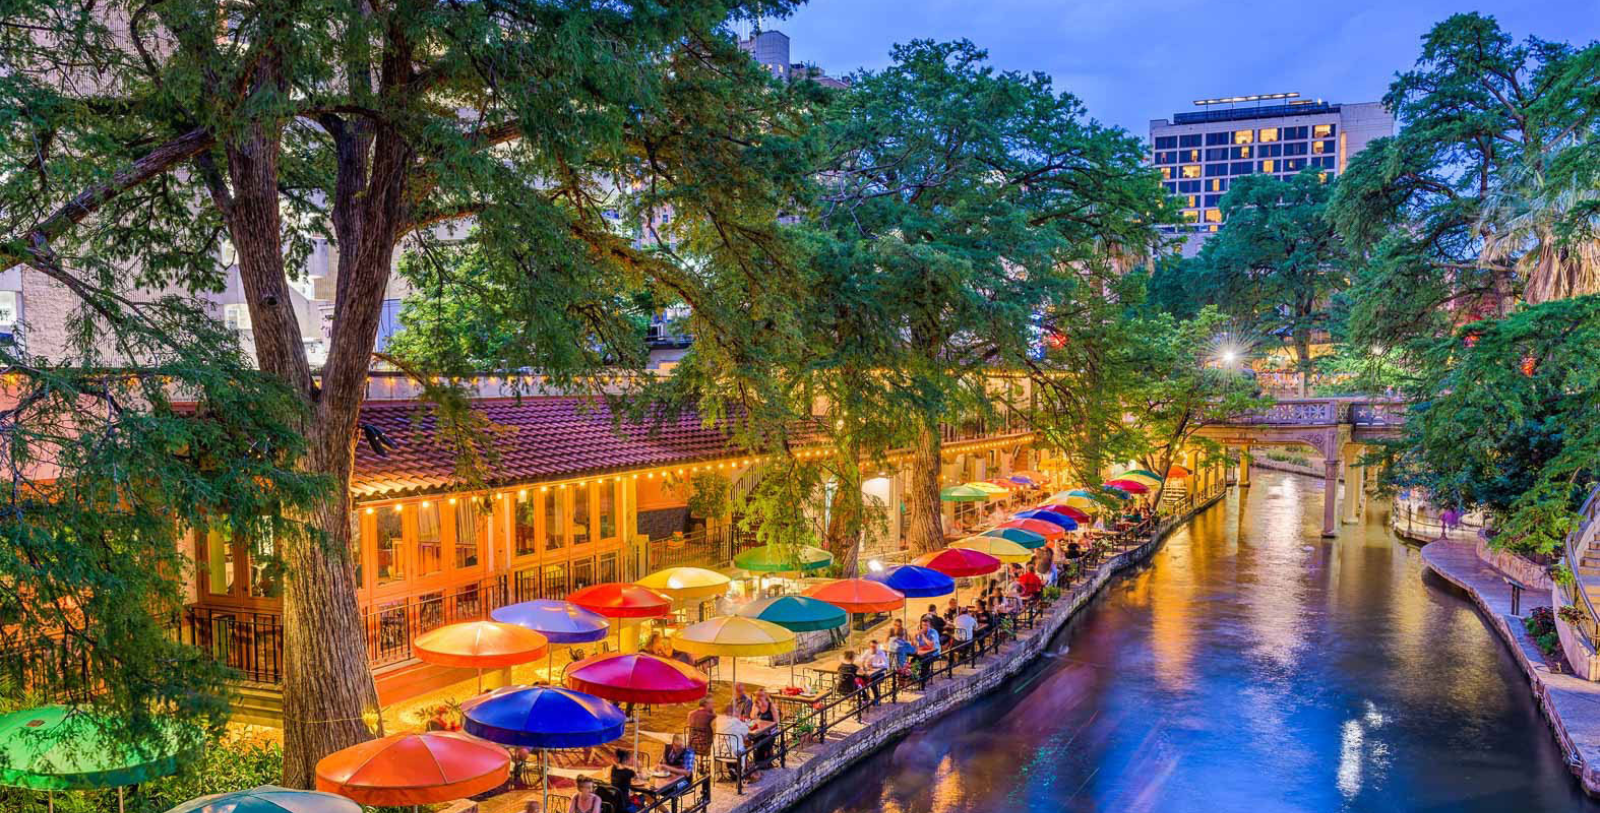 Taste flavorful Tex-Mex and saucy, smoke-kissed barbecue at one of the waterfront restaurants along the San Antonio River Walk.